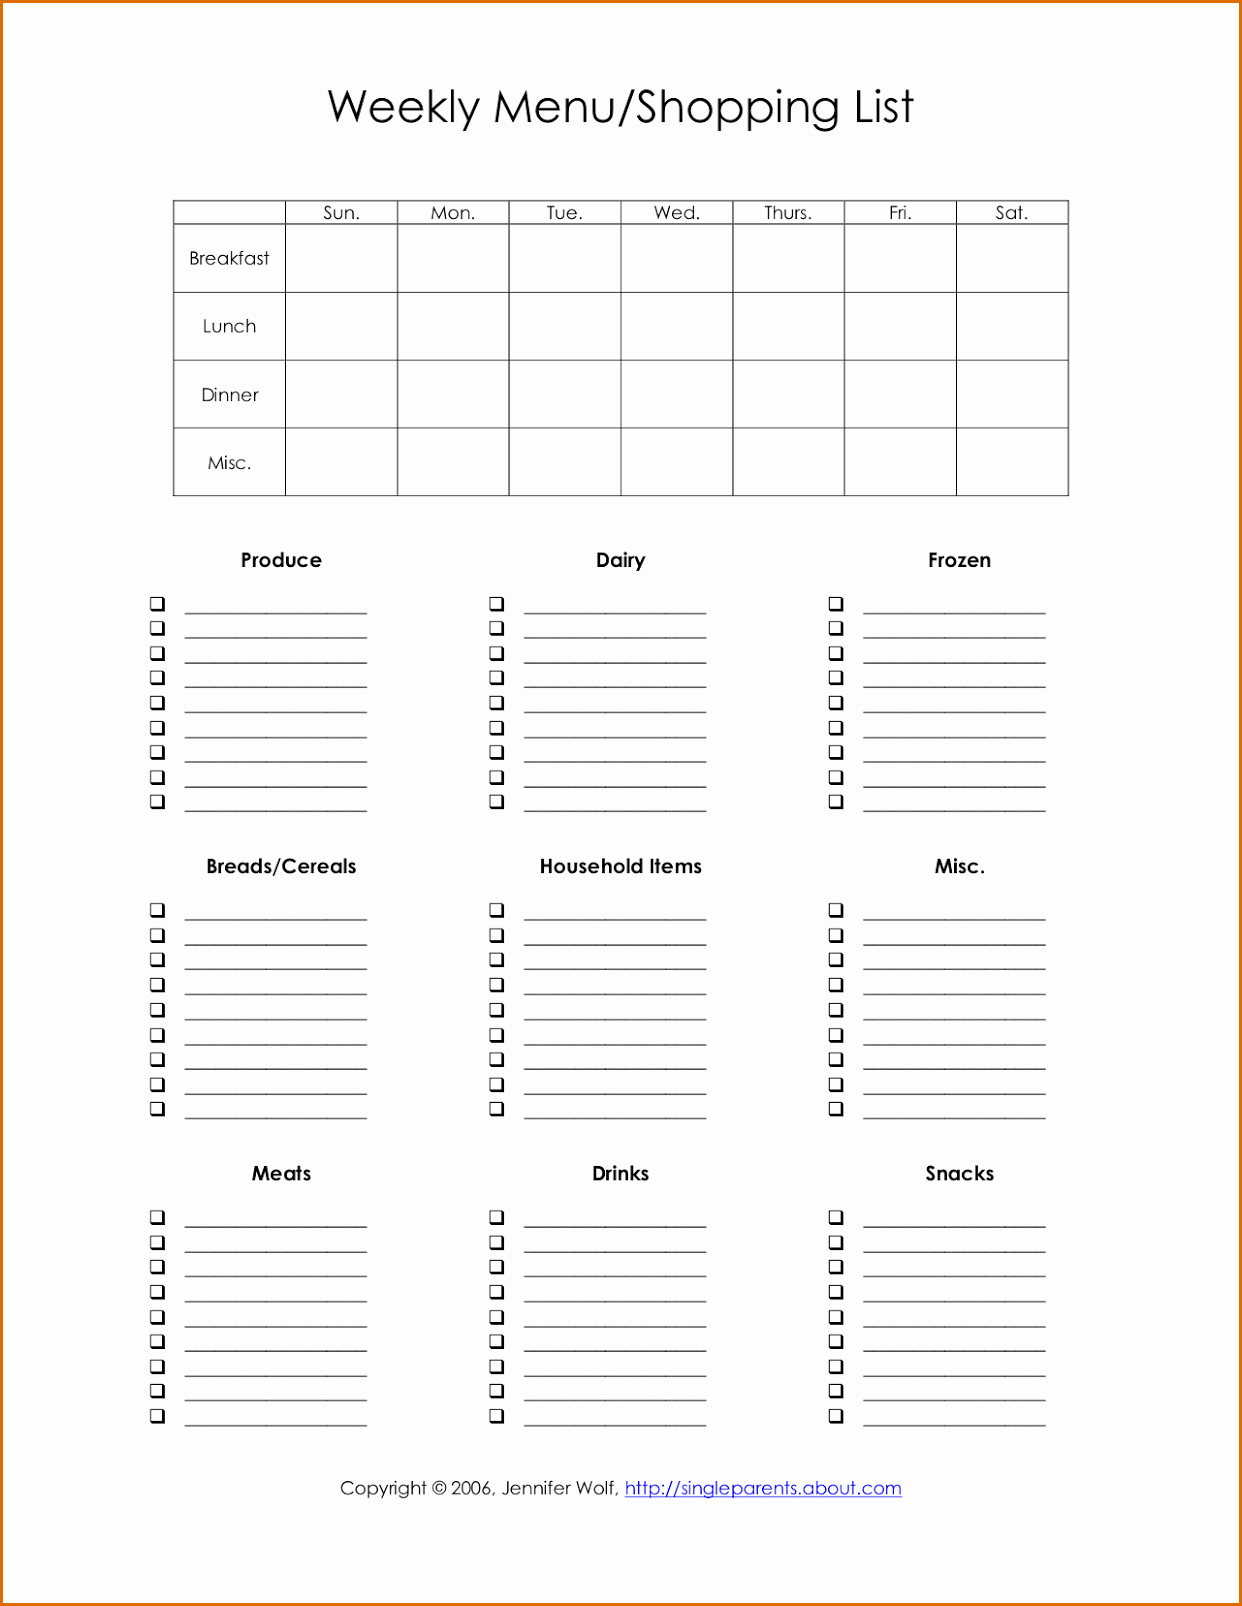 Weekly Menu Template Word Awesome 8 Free Menu Templates for Word